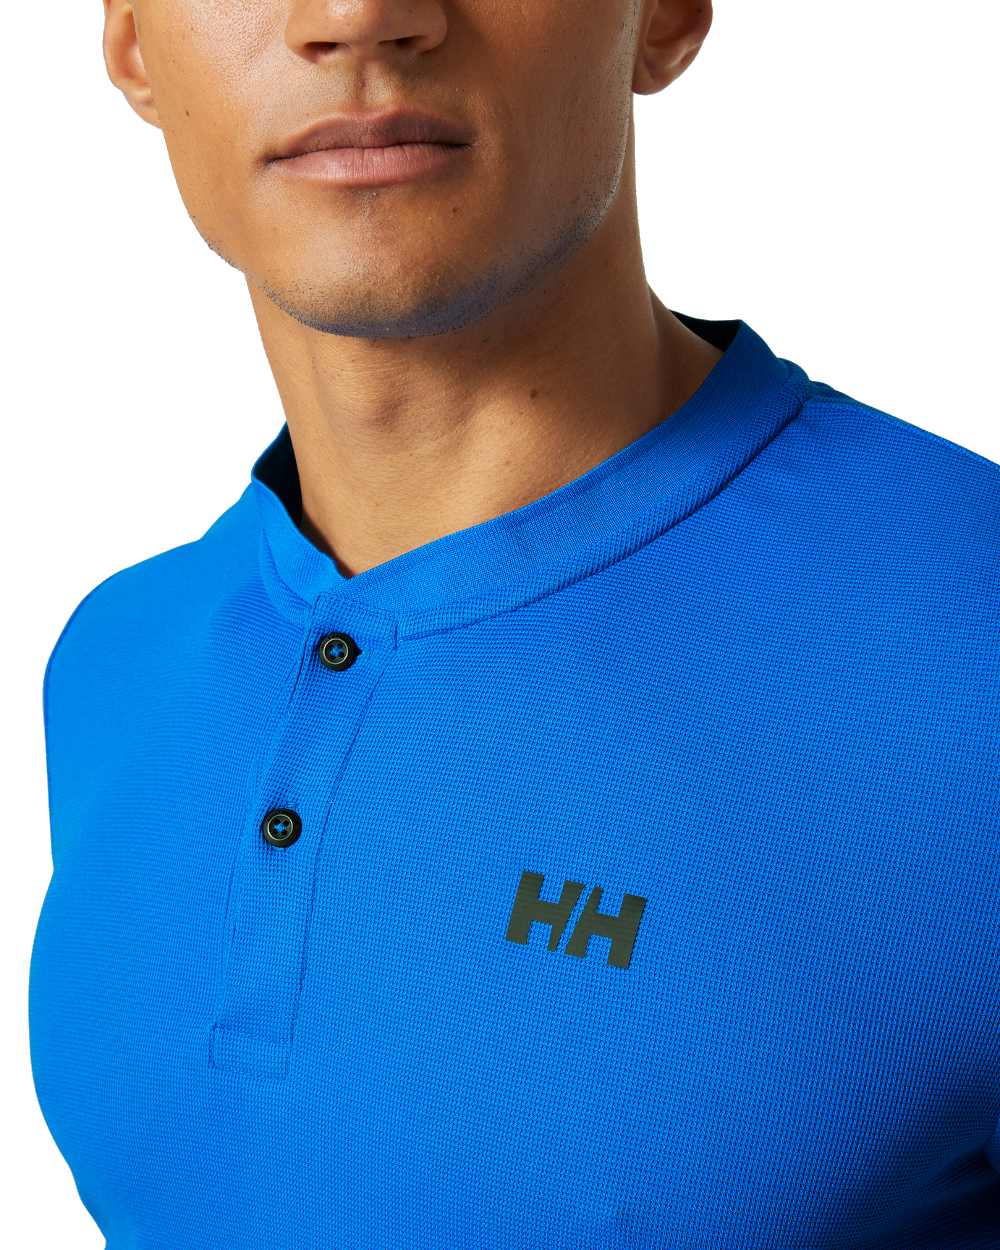 Electric Blue Coloured Helly Hansen Mens HP Sun Protective Tops on white background 